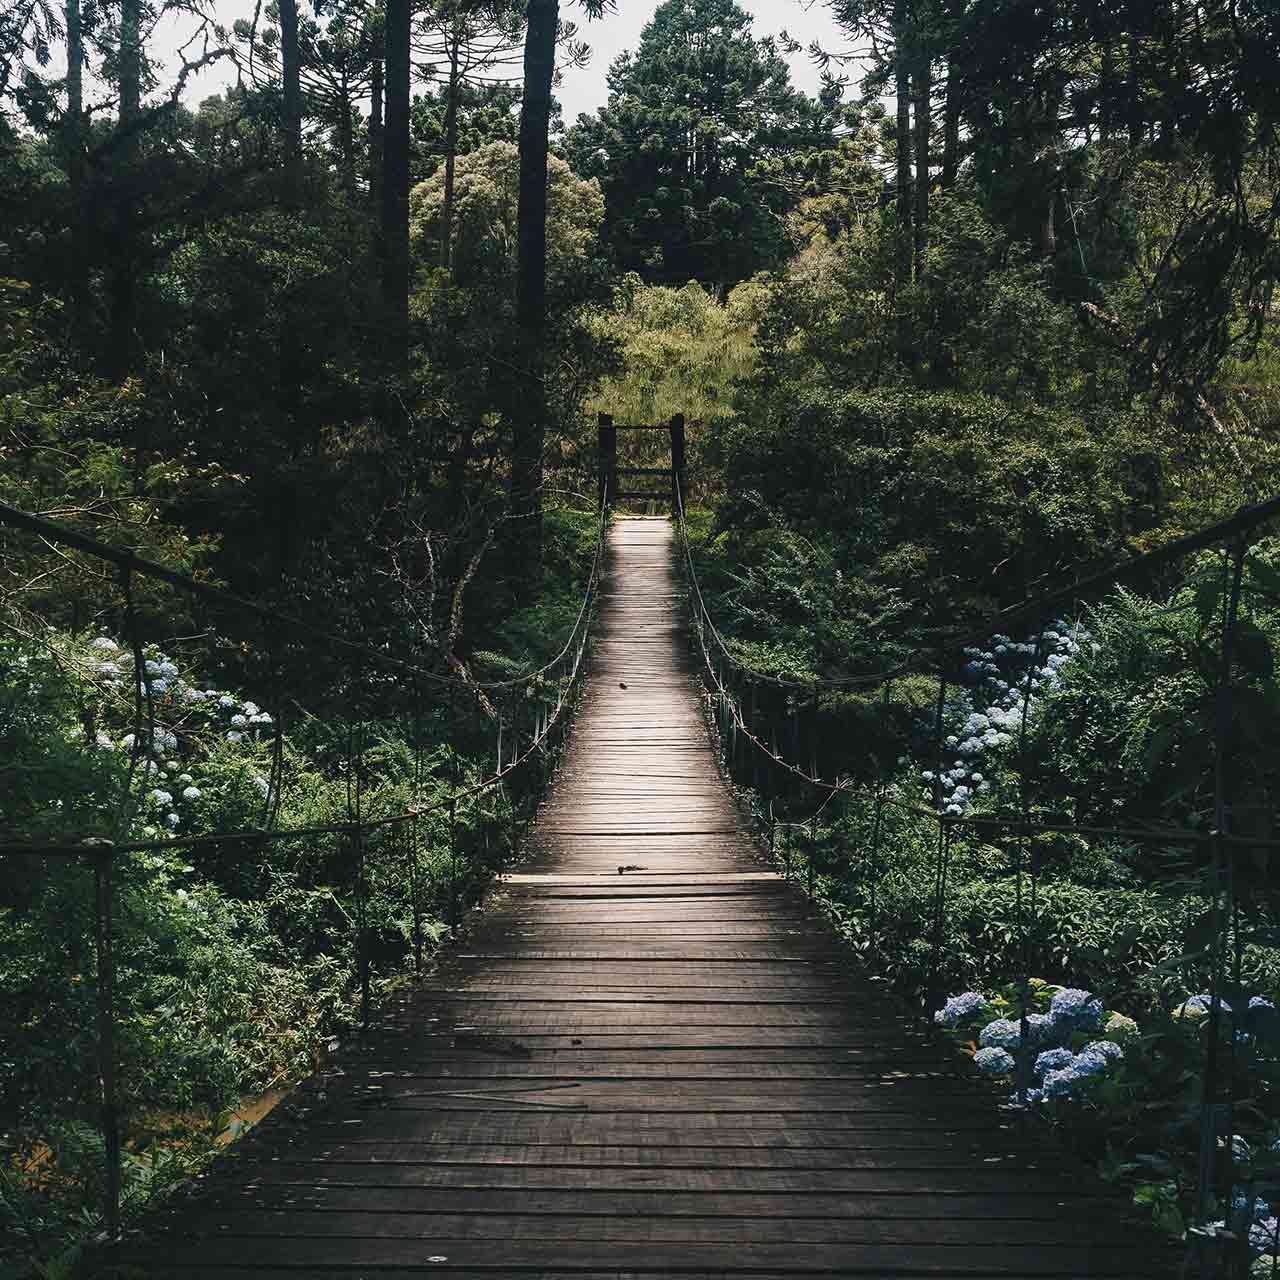 Photo of a wooden suspension bridge in a forest